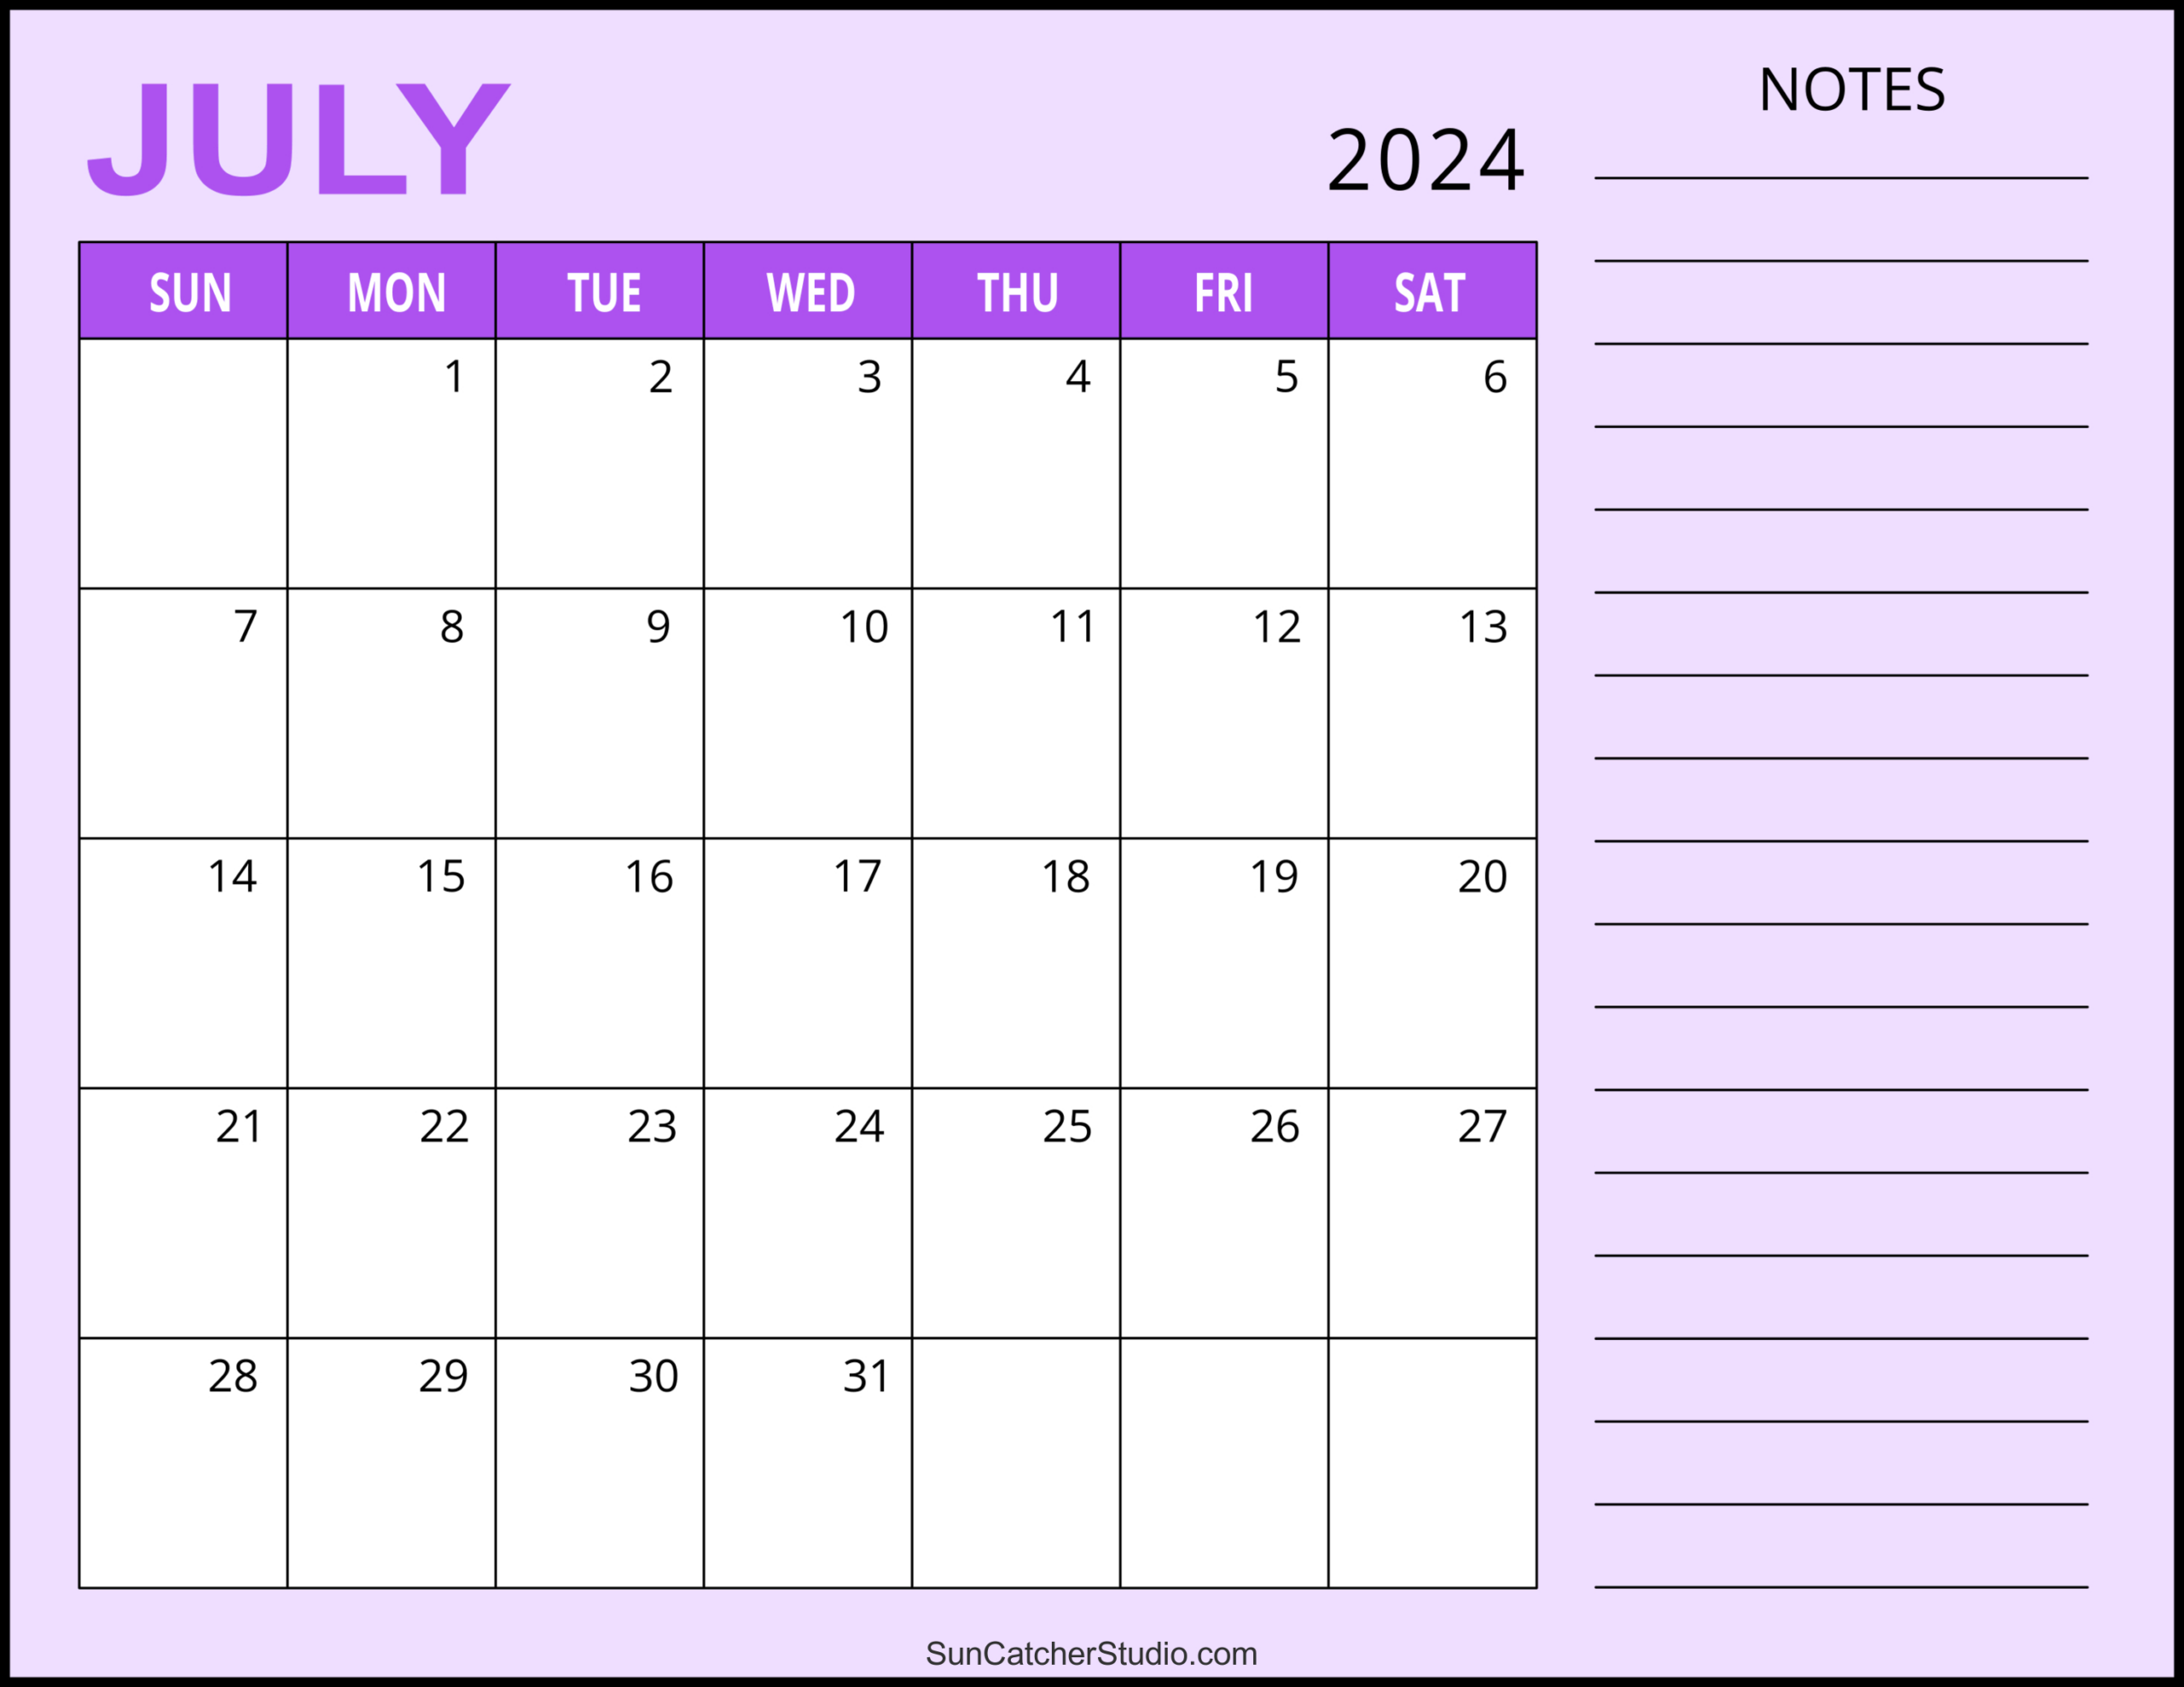 July 2024 Calendar (Free Printable) – Diy Projects, Patterns | July Calendar With Notes 2024